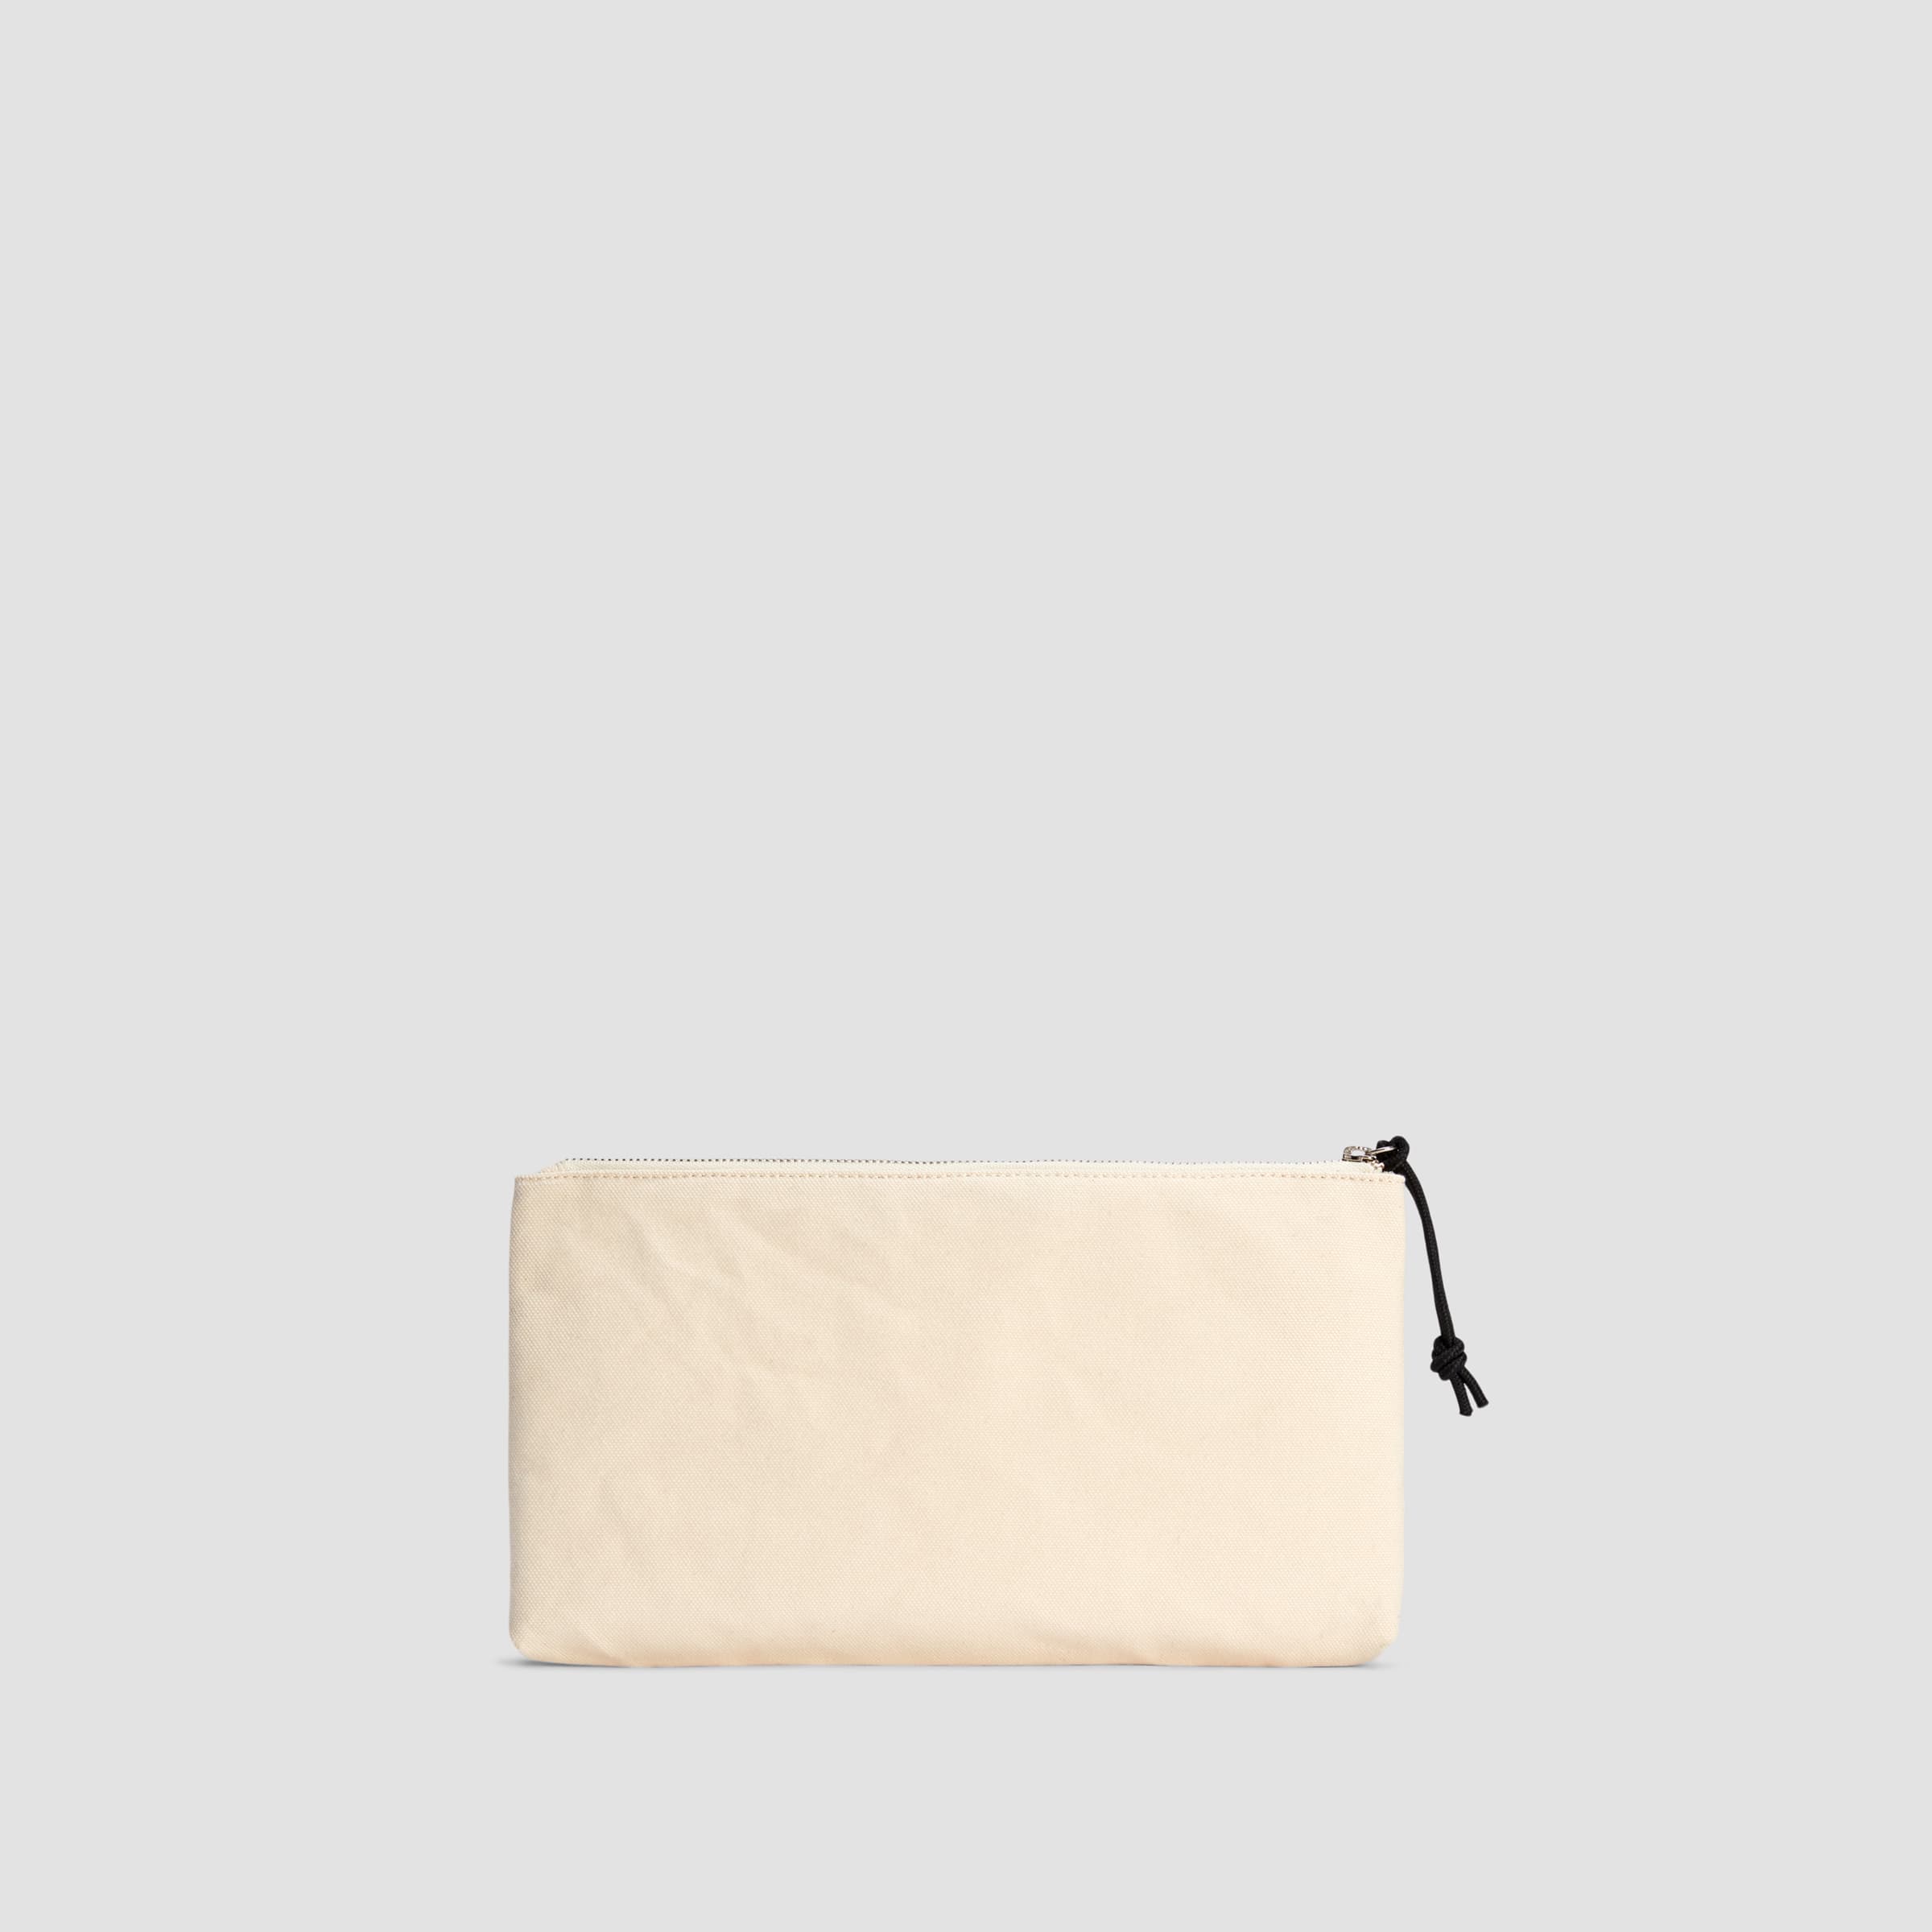 Natural Canvas Pouch by Make Market®